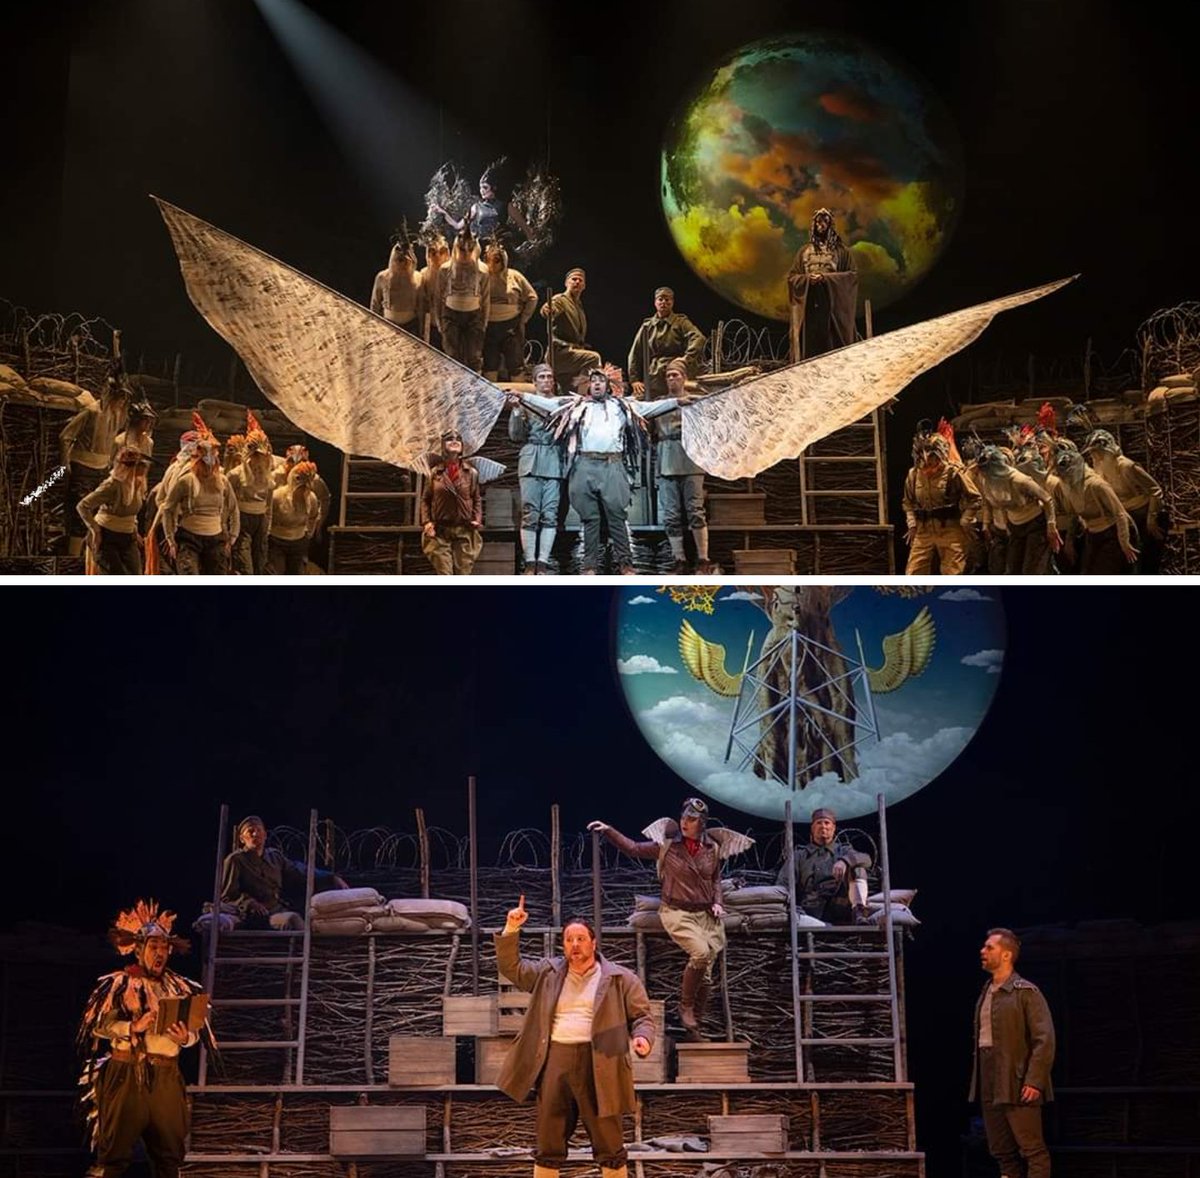 Stunning production of Braunfels' The Birds, thanks to @PacificOperaVictoria's Timothy Vernon, who led the @VicSymphony's musicians in a superb performance of the gorgeous score. Victoria, BC is so lucky to have Timothy and his 'little opera company on an island in the Pacific'.